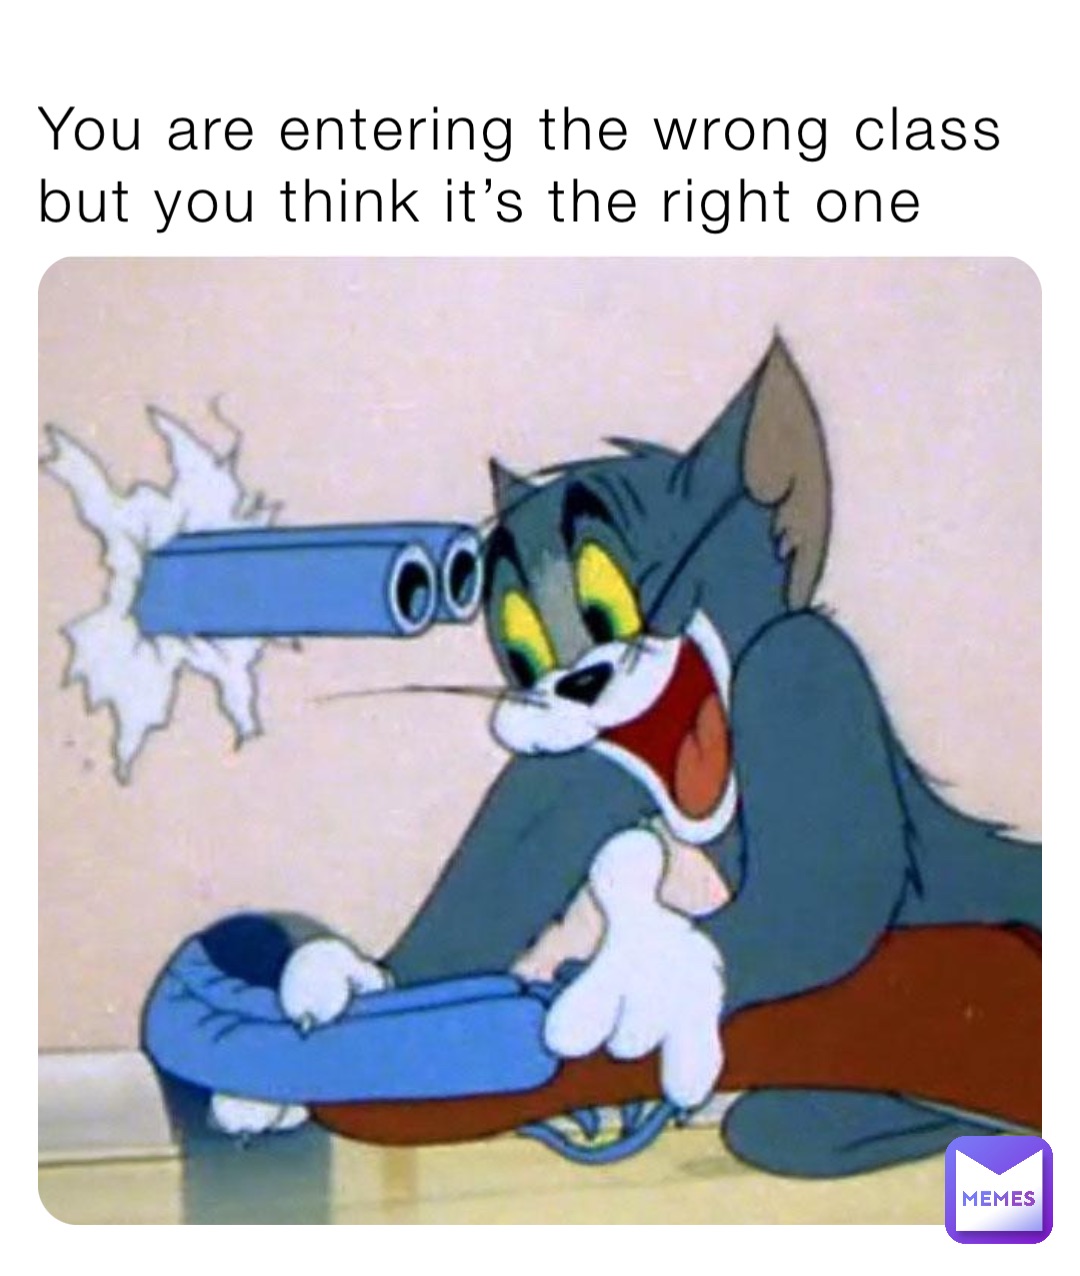 You are entering the wrong class but you think it’s the right one